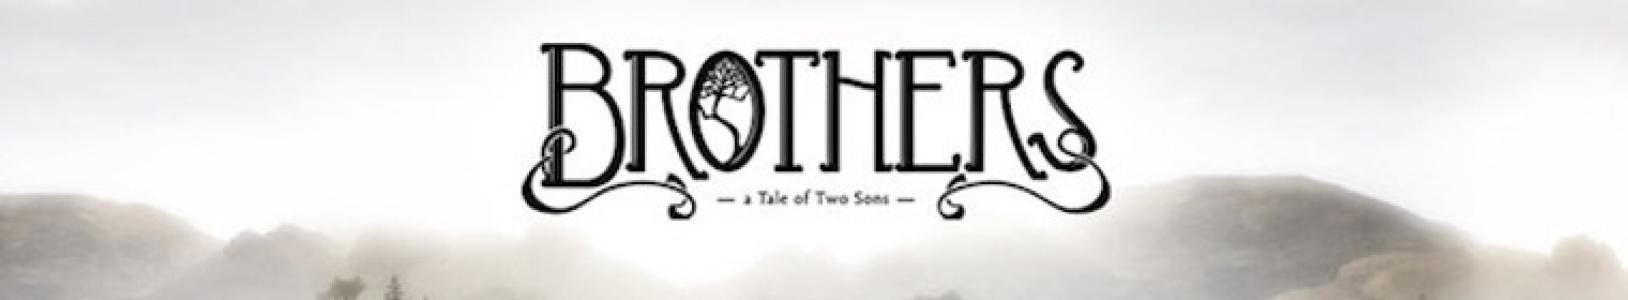 Brothers: A Tale of Two Sons banner